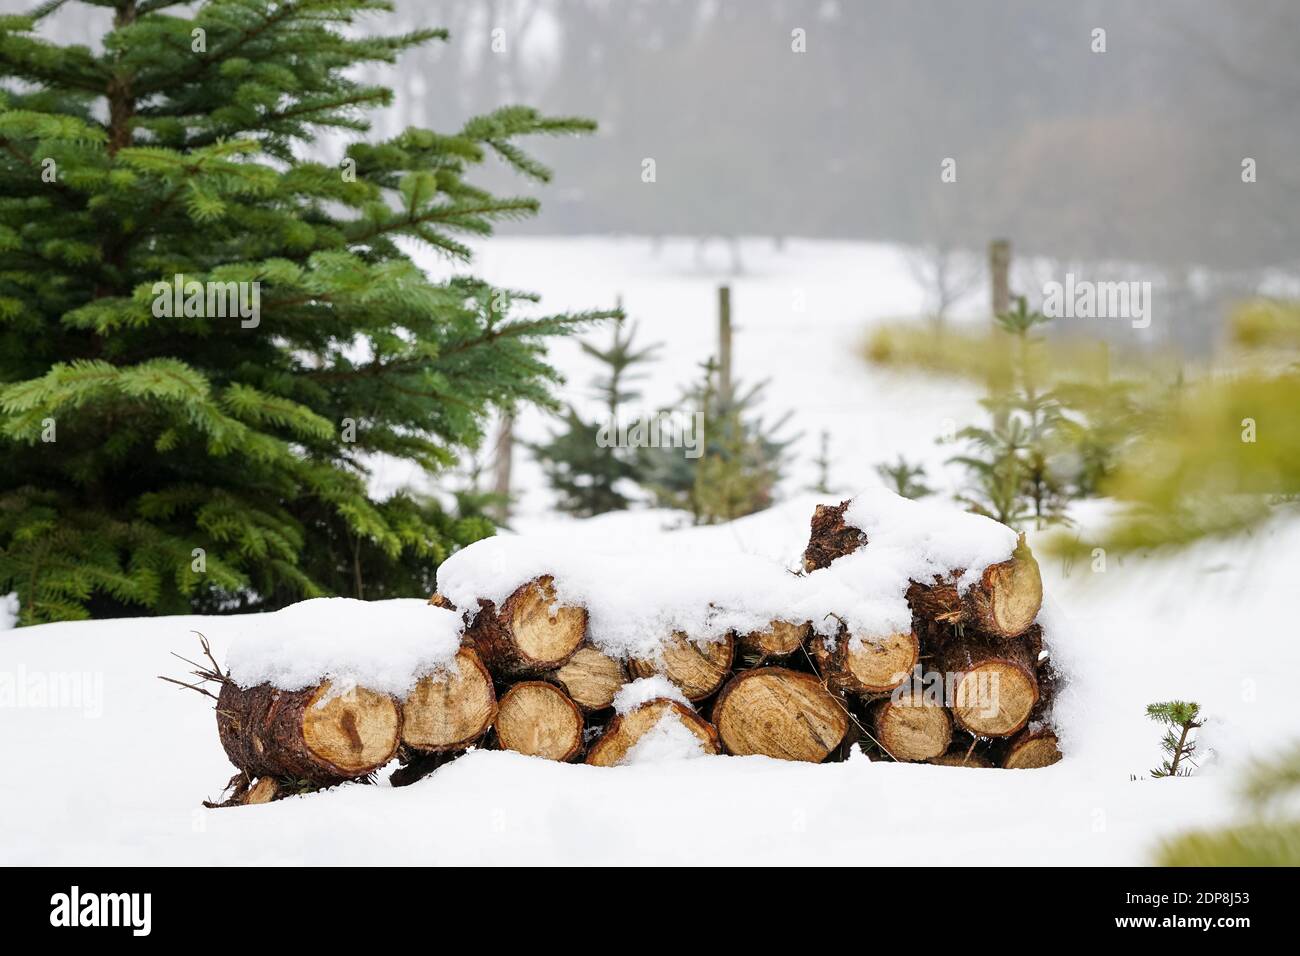 Neatly piled stack of chopped dry trunks wood covered with snow outdoors on bright cold winter day, abstract background. Chunks of stacked firewood. Stock Photo